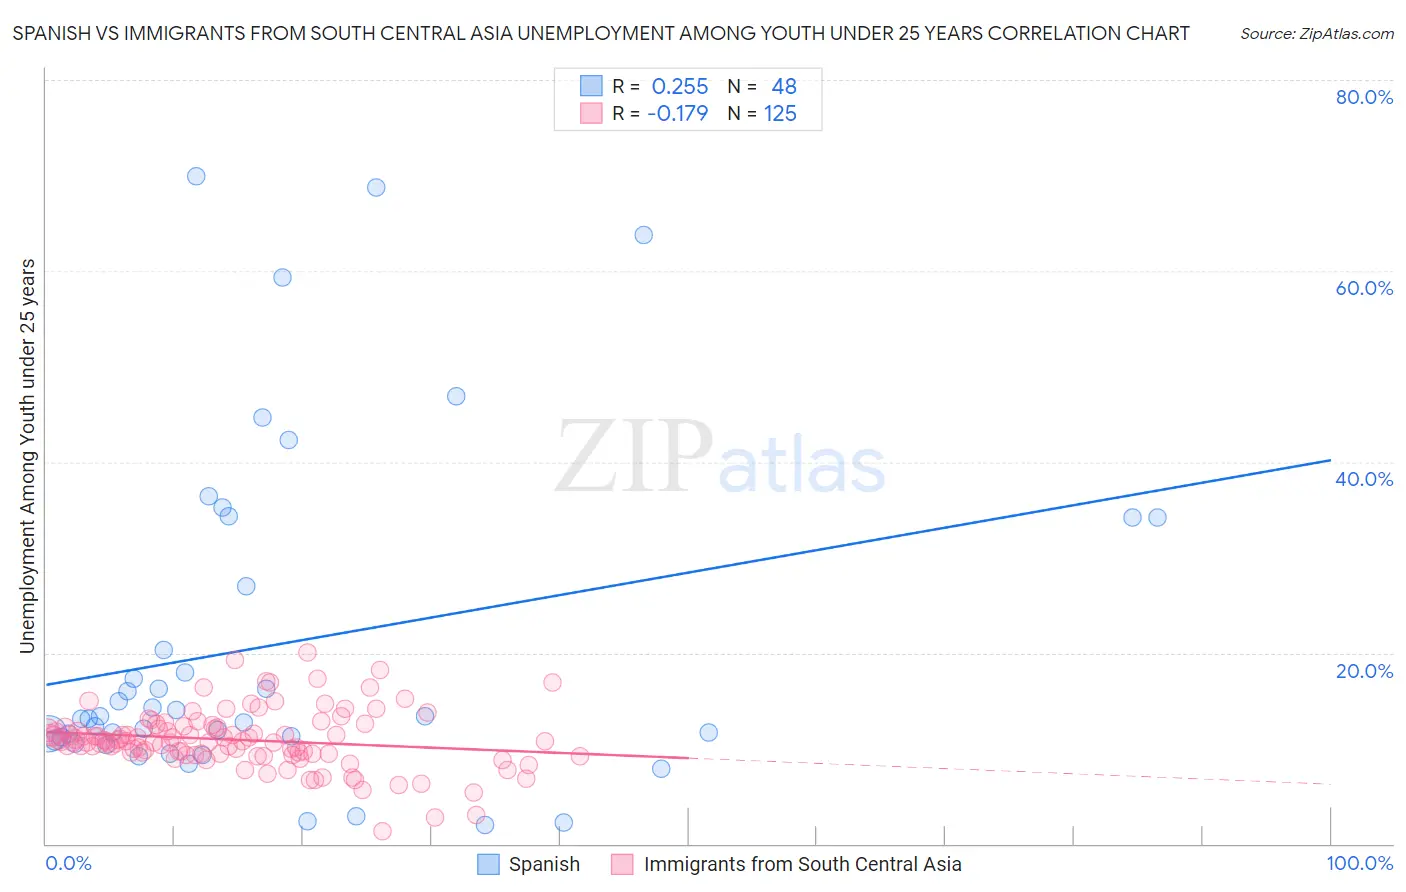 Spanish vs Immigrants from South Central Asia Unemployment Among Youth under 25 years